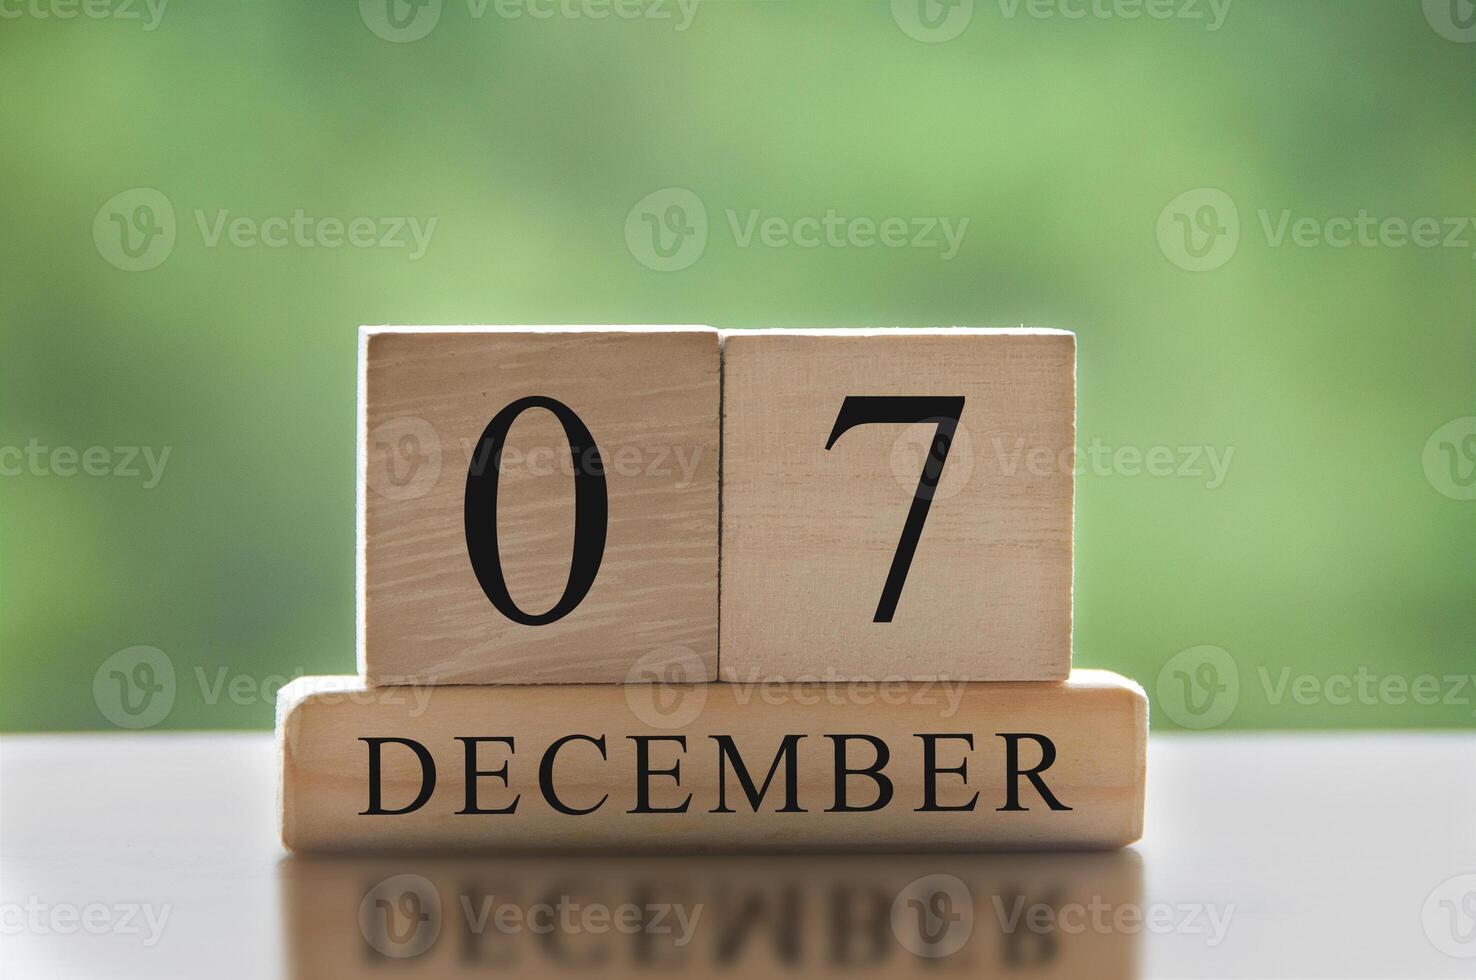 December 7 text on wooden blocks with blurred nature background. Calendar concept photo